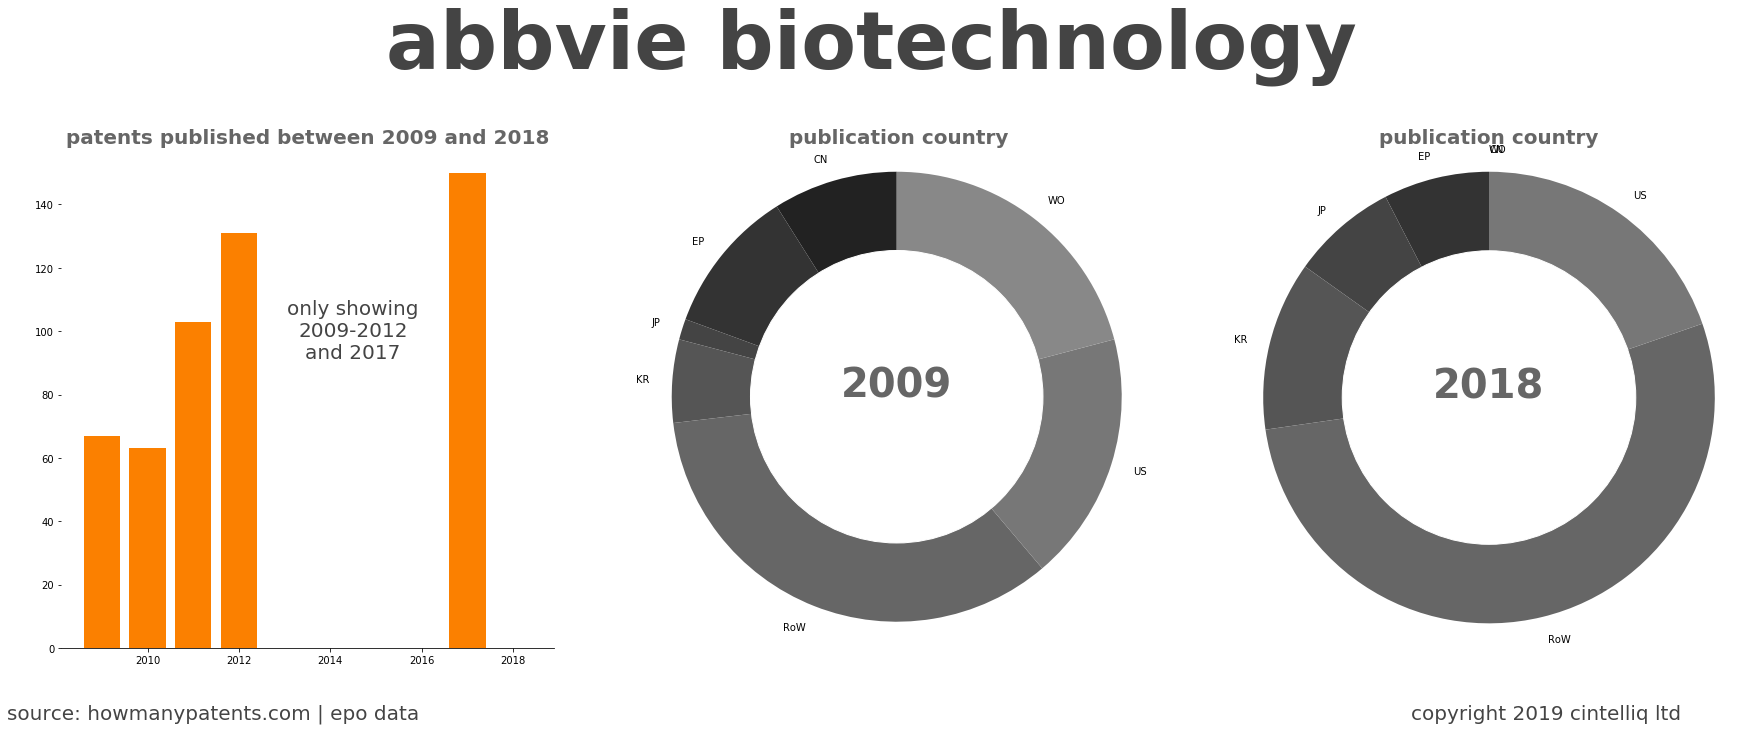 summary of patents for Abbvie Biotechnology